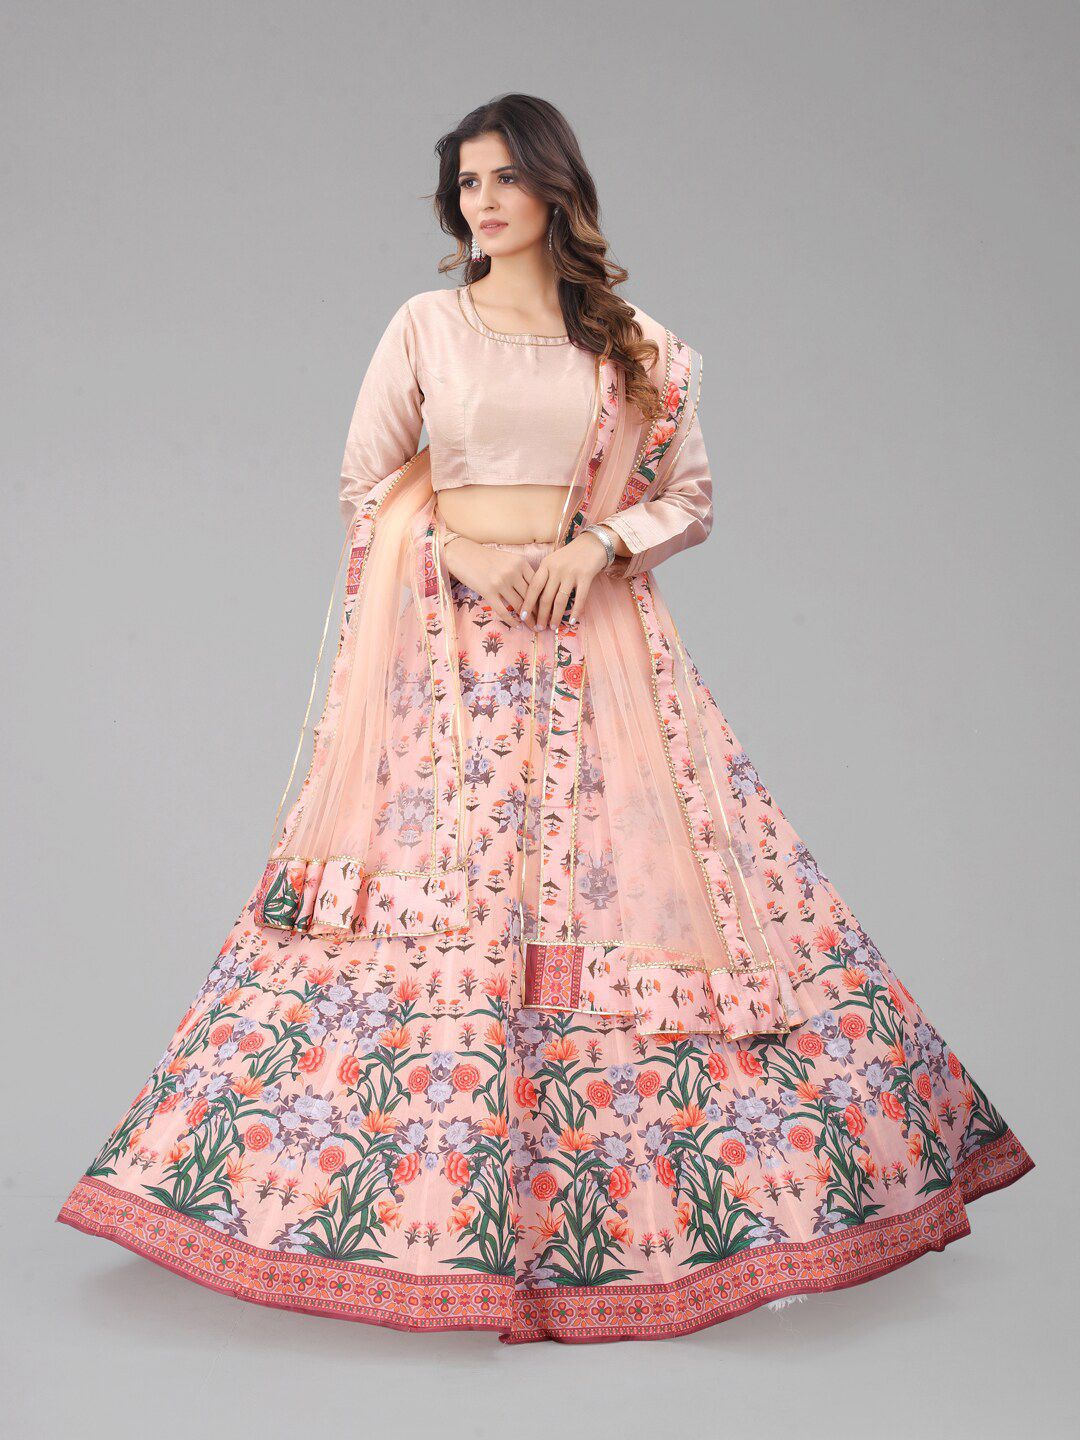 SHOPGARB Rose Gold & Blue Printed Semi-Stitched Lehenga & Unstitched Blouse With Dupatta Price in India